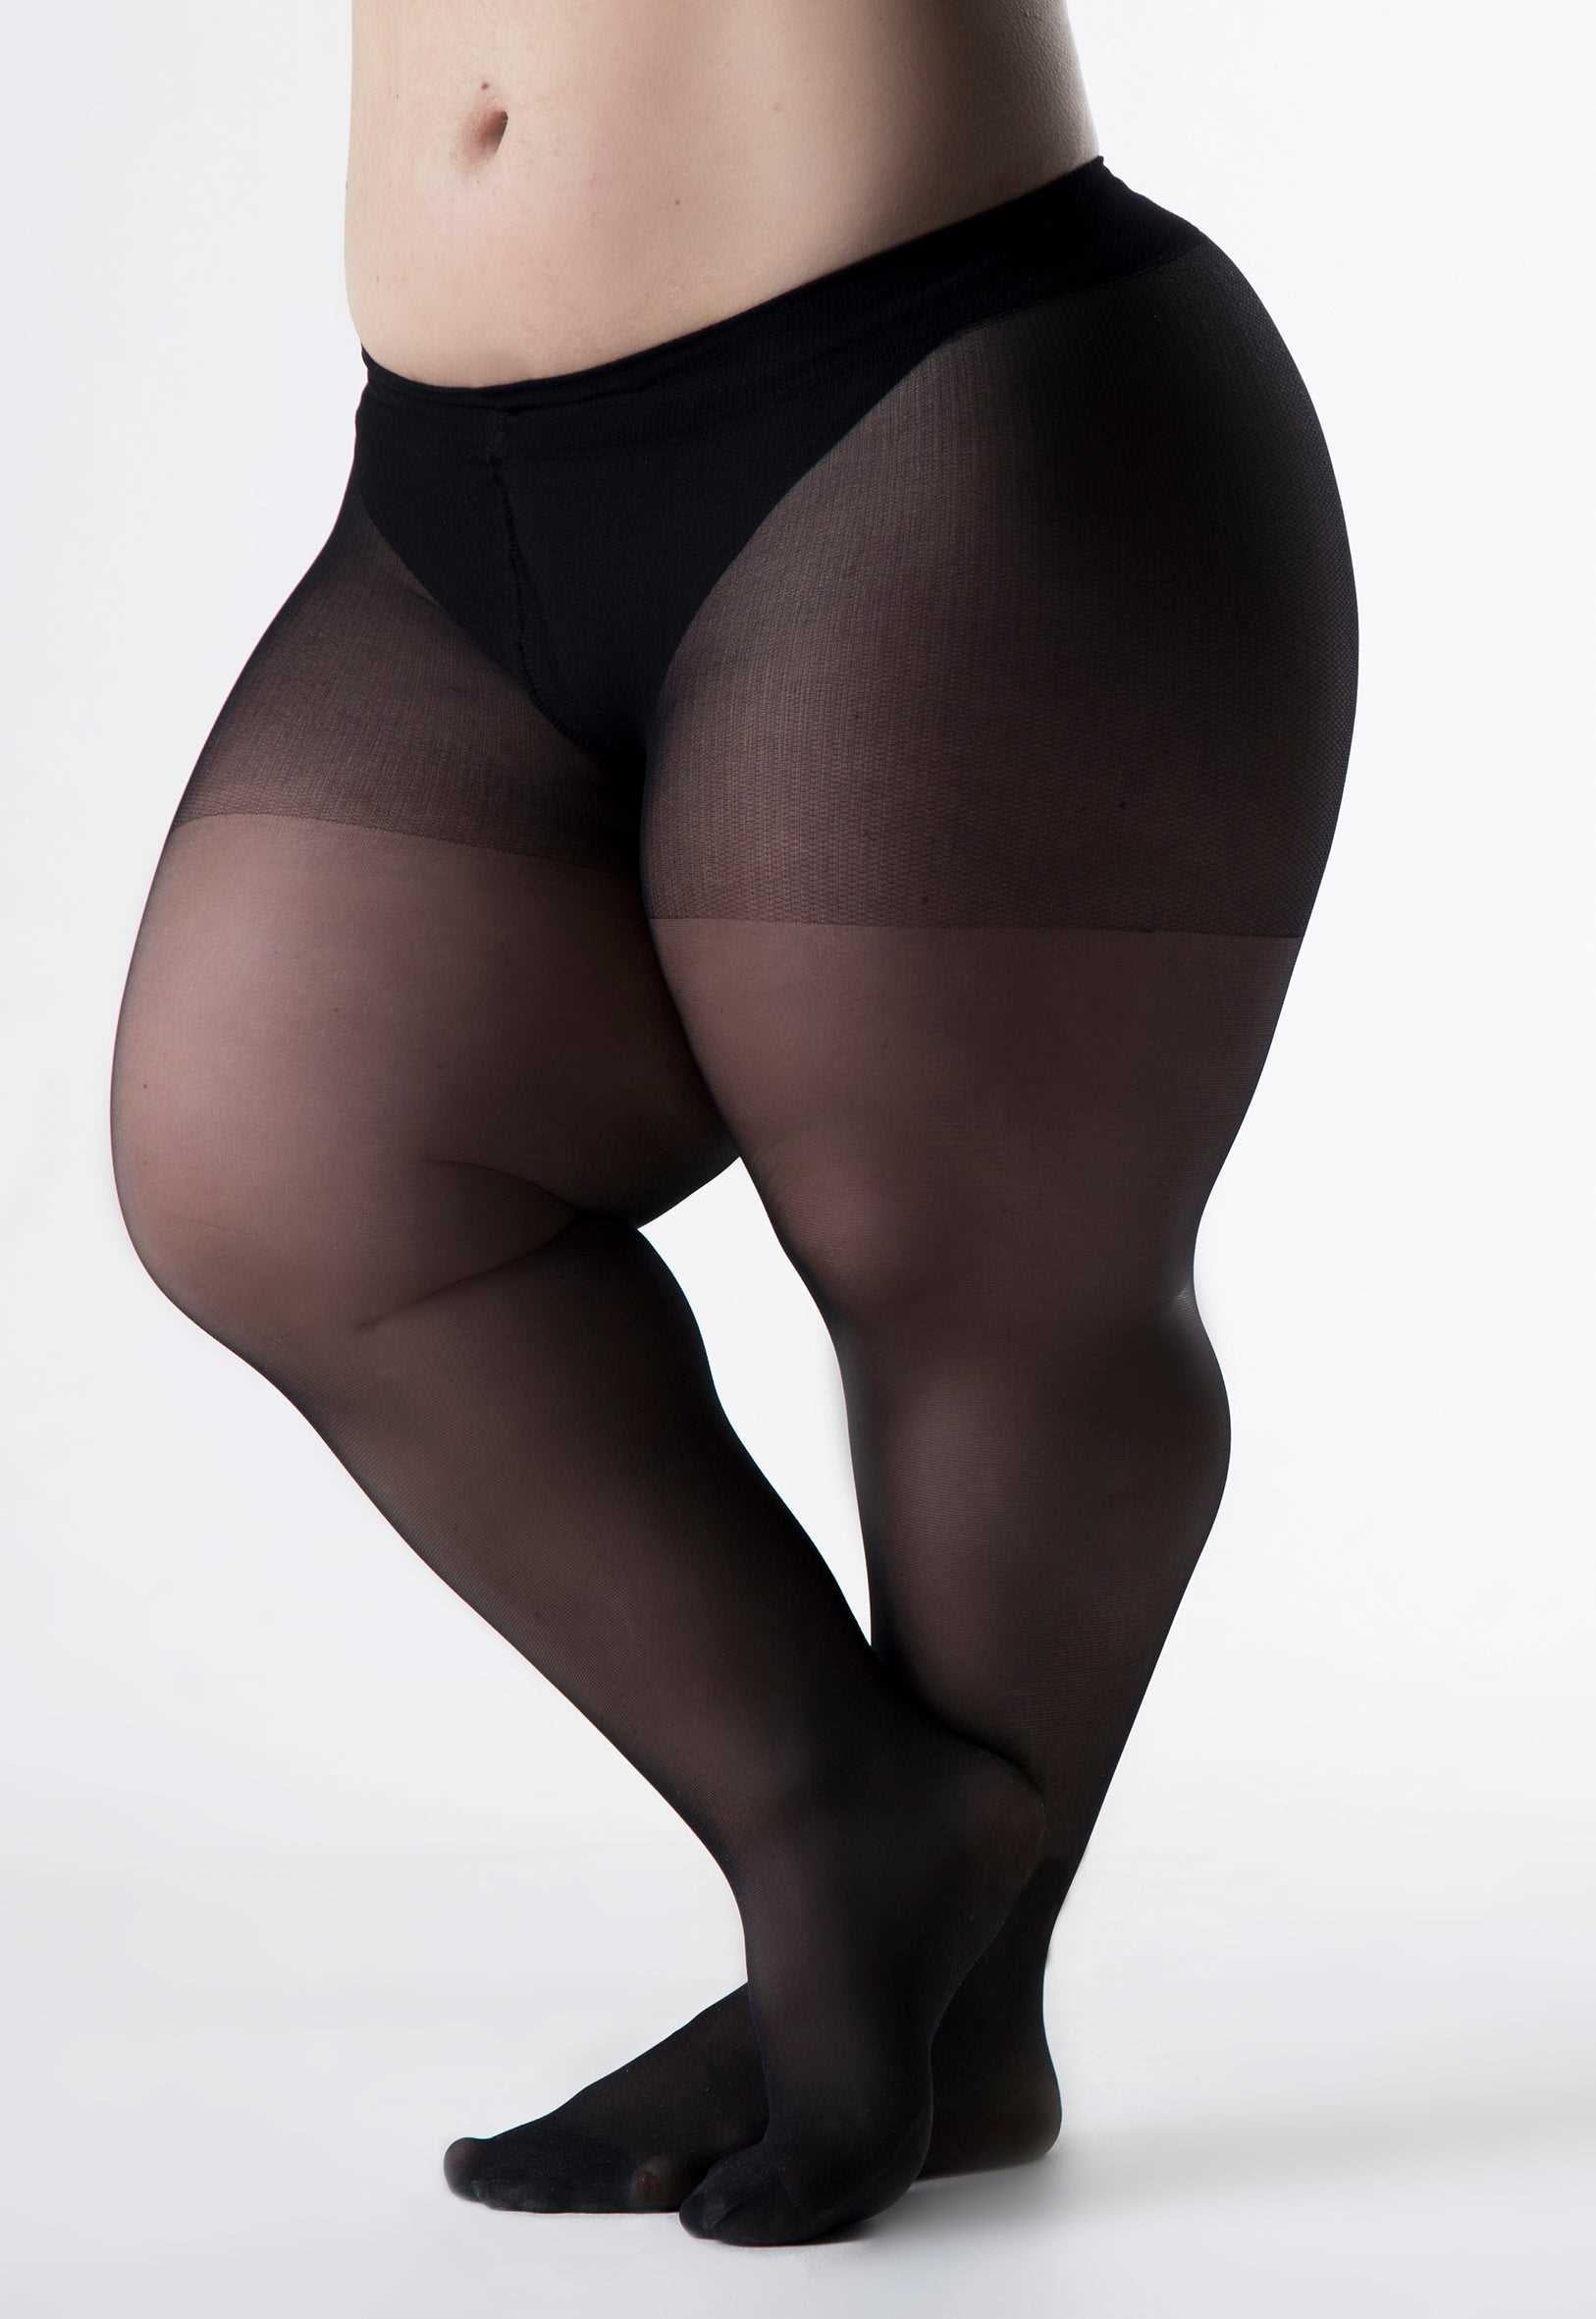 woman with dwarfism wearing tights fitted for her